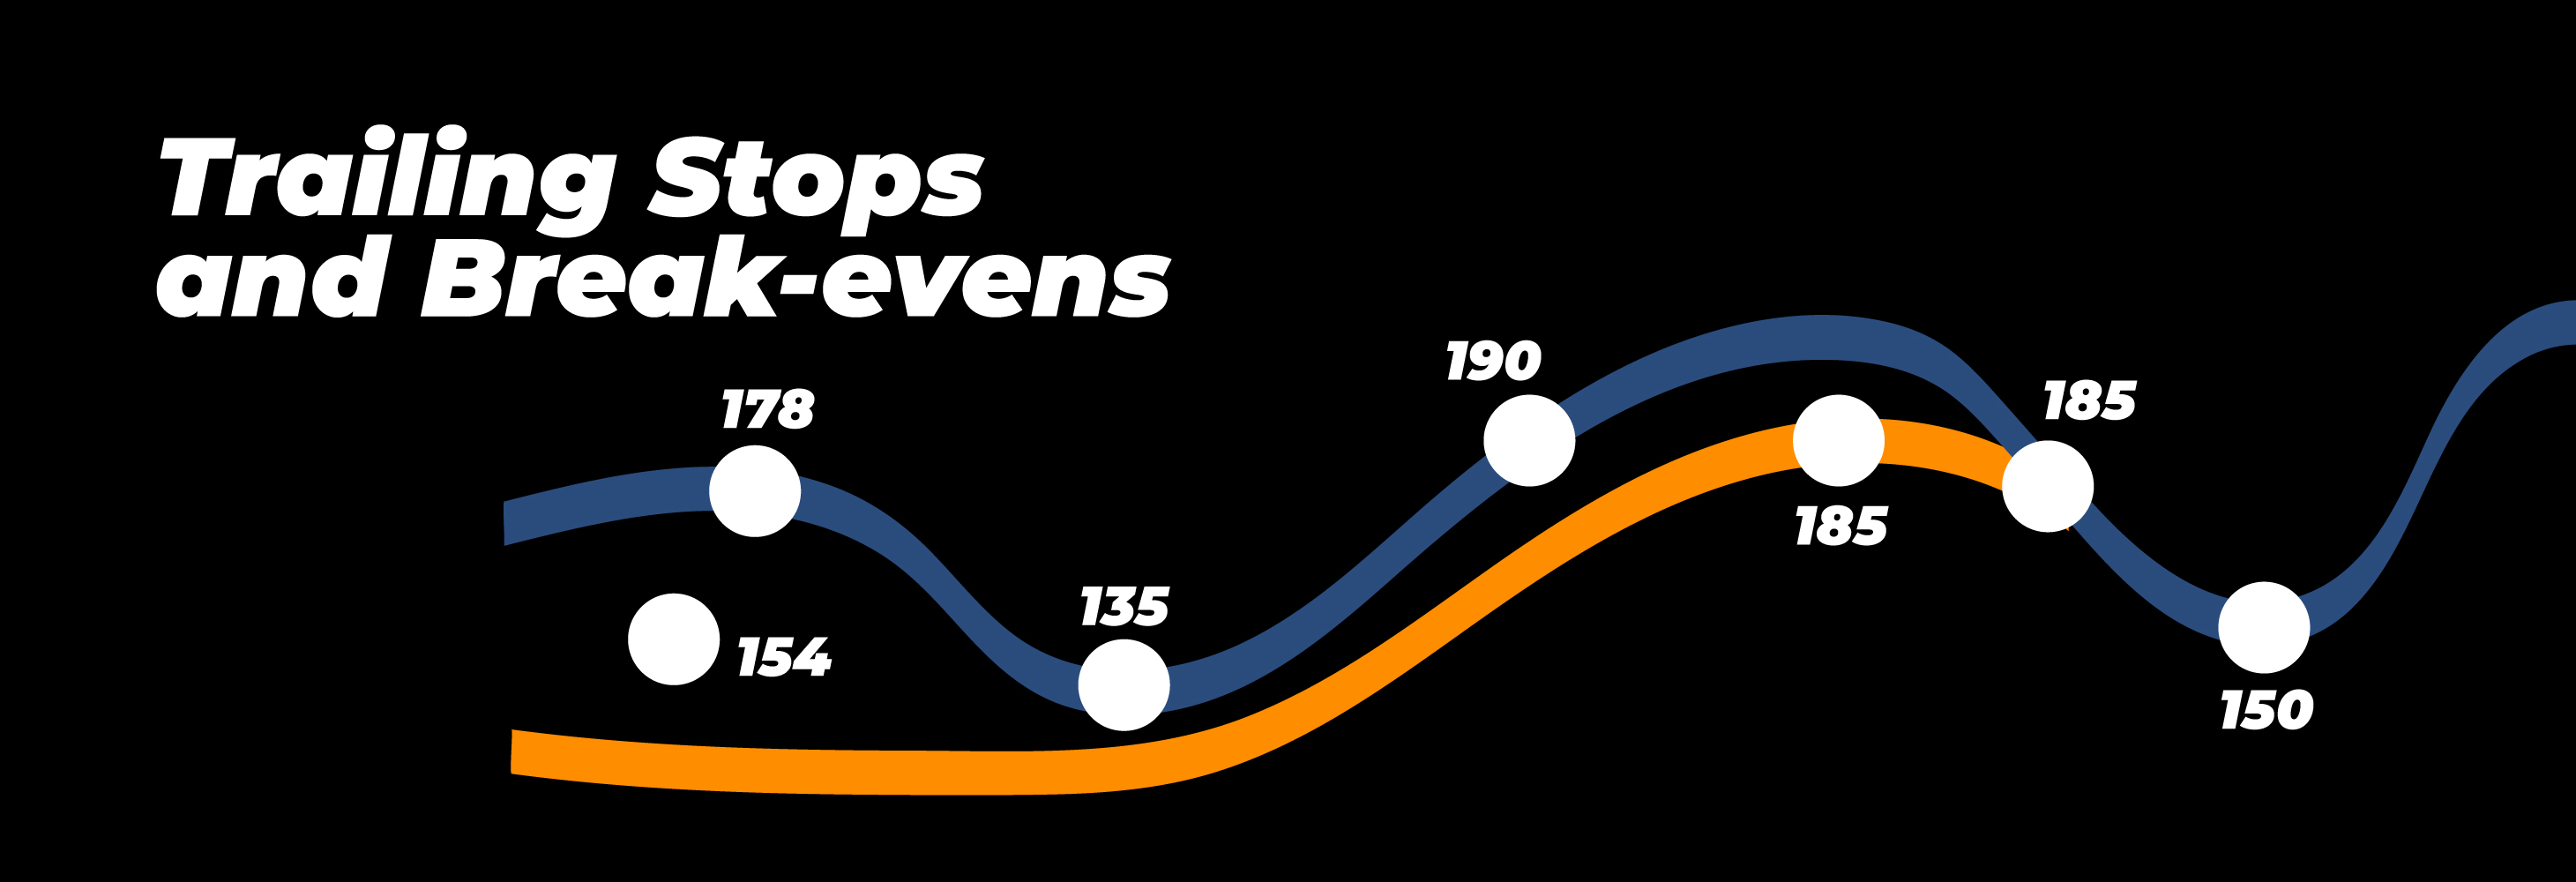 Trailing Stops and Break-evens